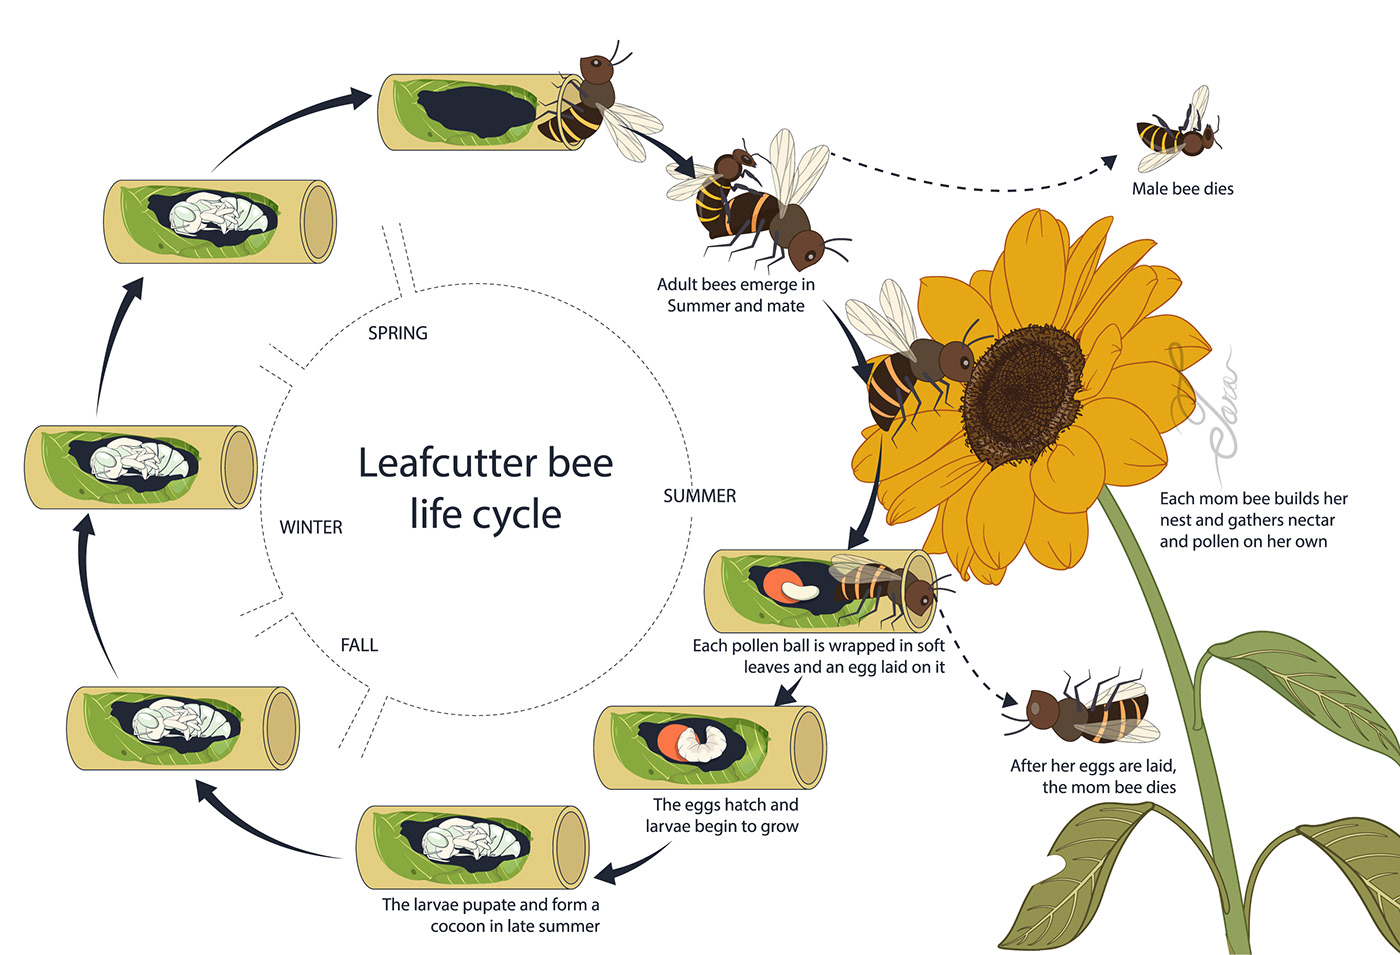 Leafcutter bee life cycle